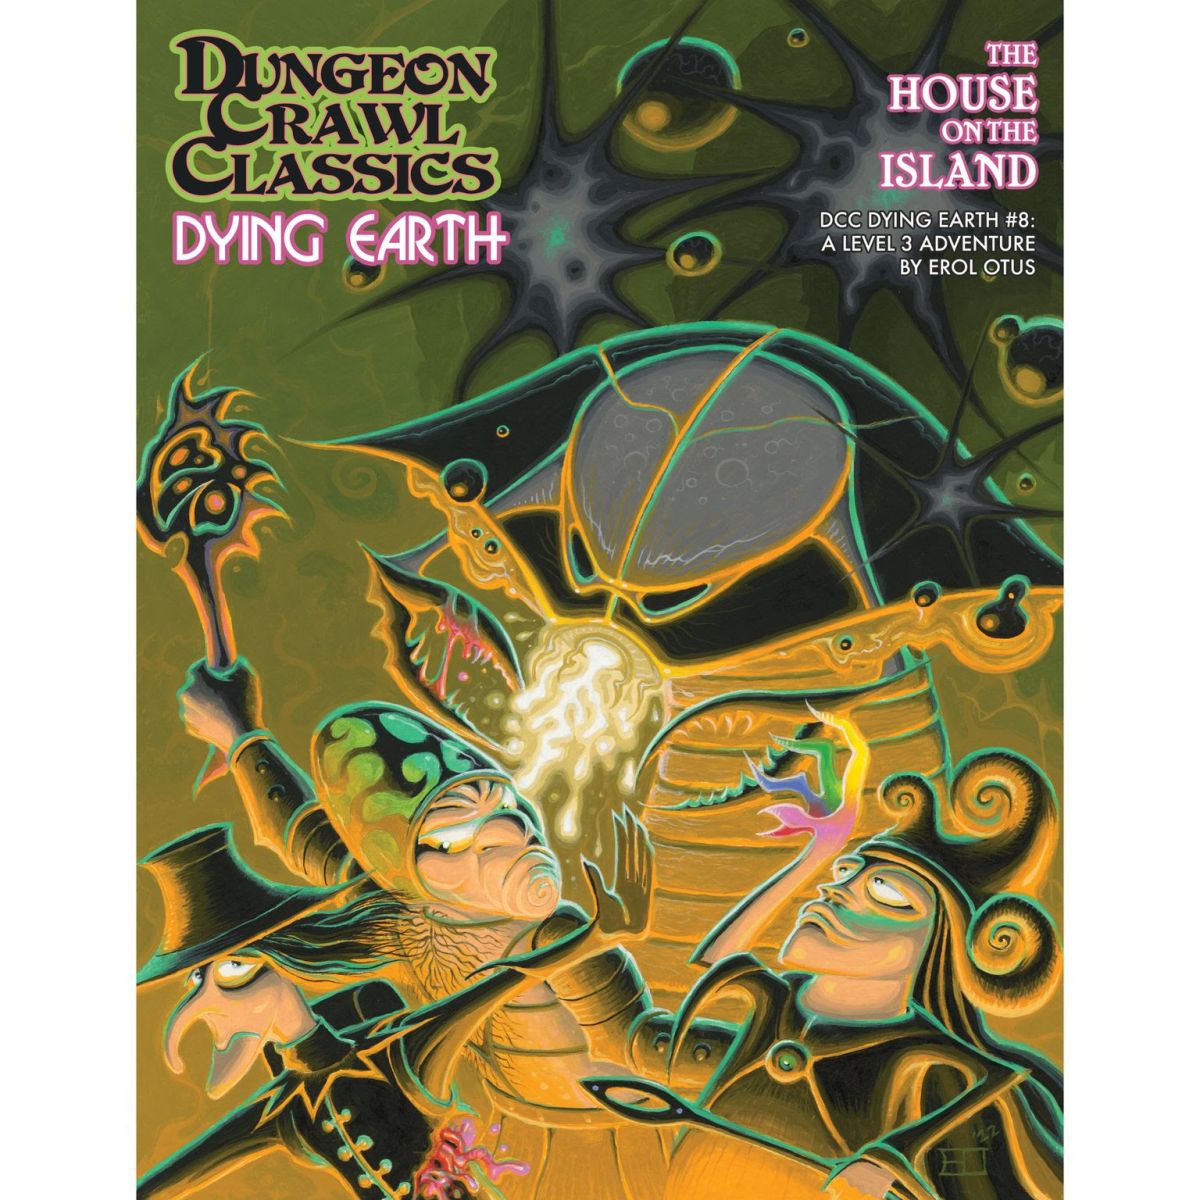 Dungeon Crawl Classics - Dying Earth #8 - The House on the Island